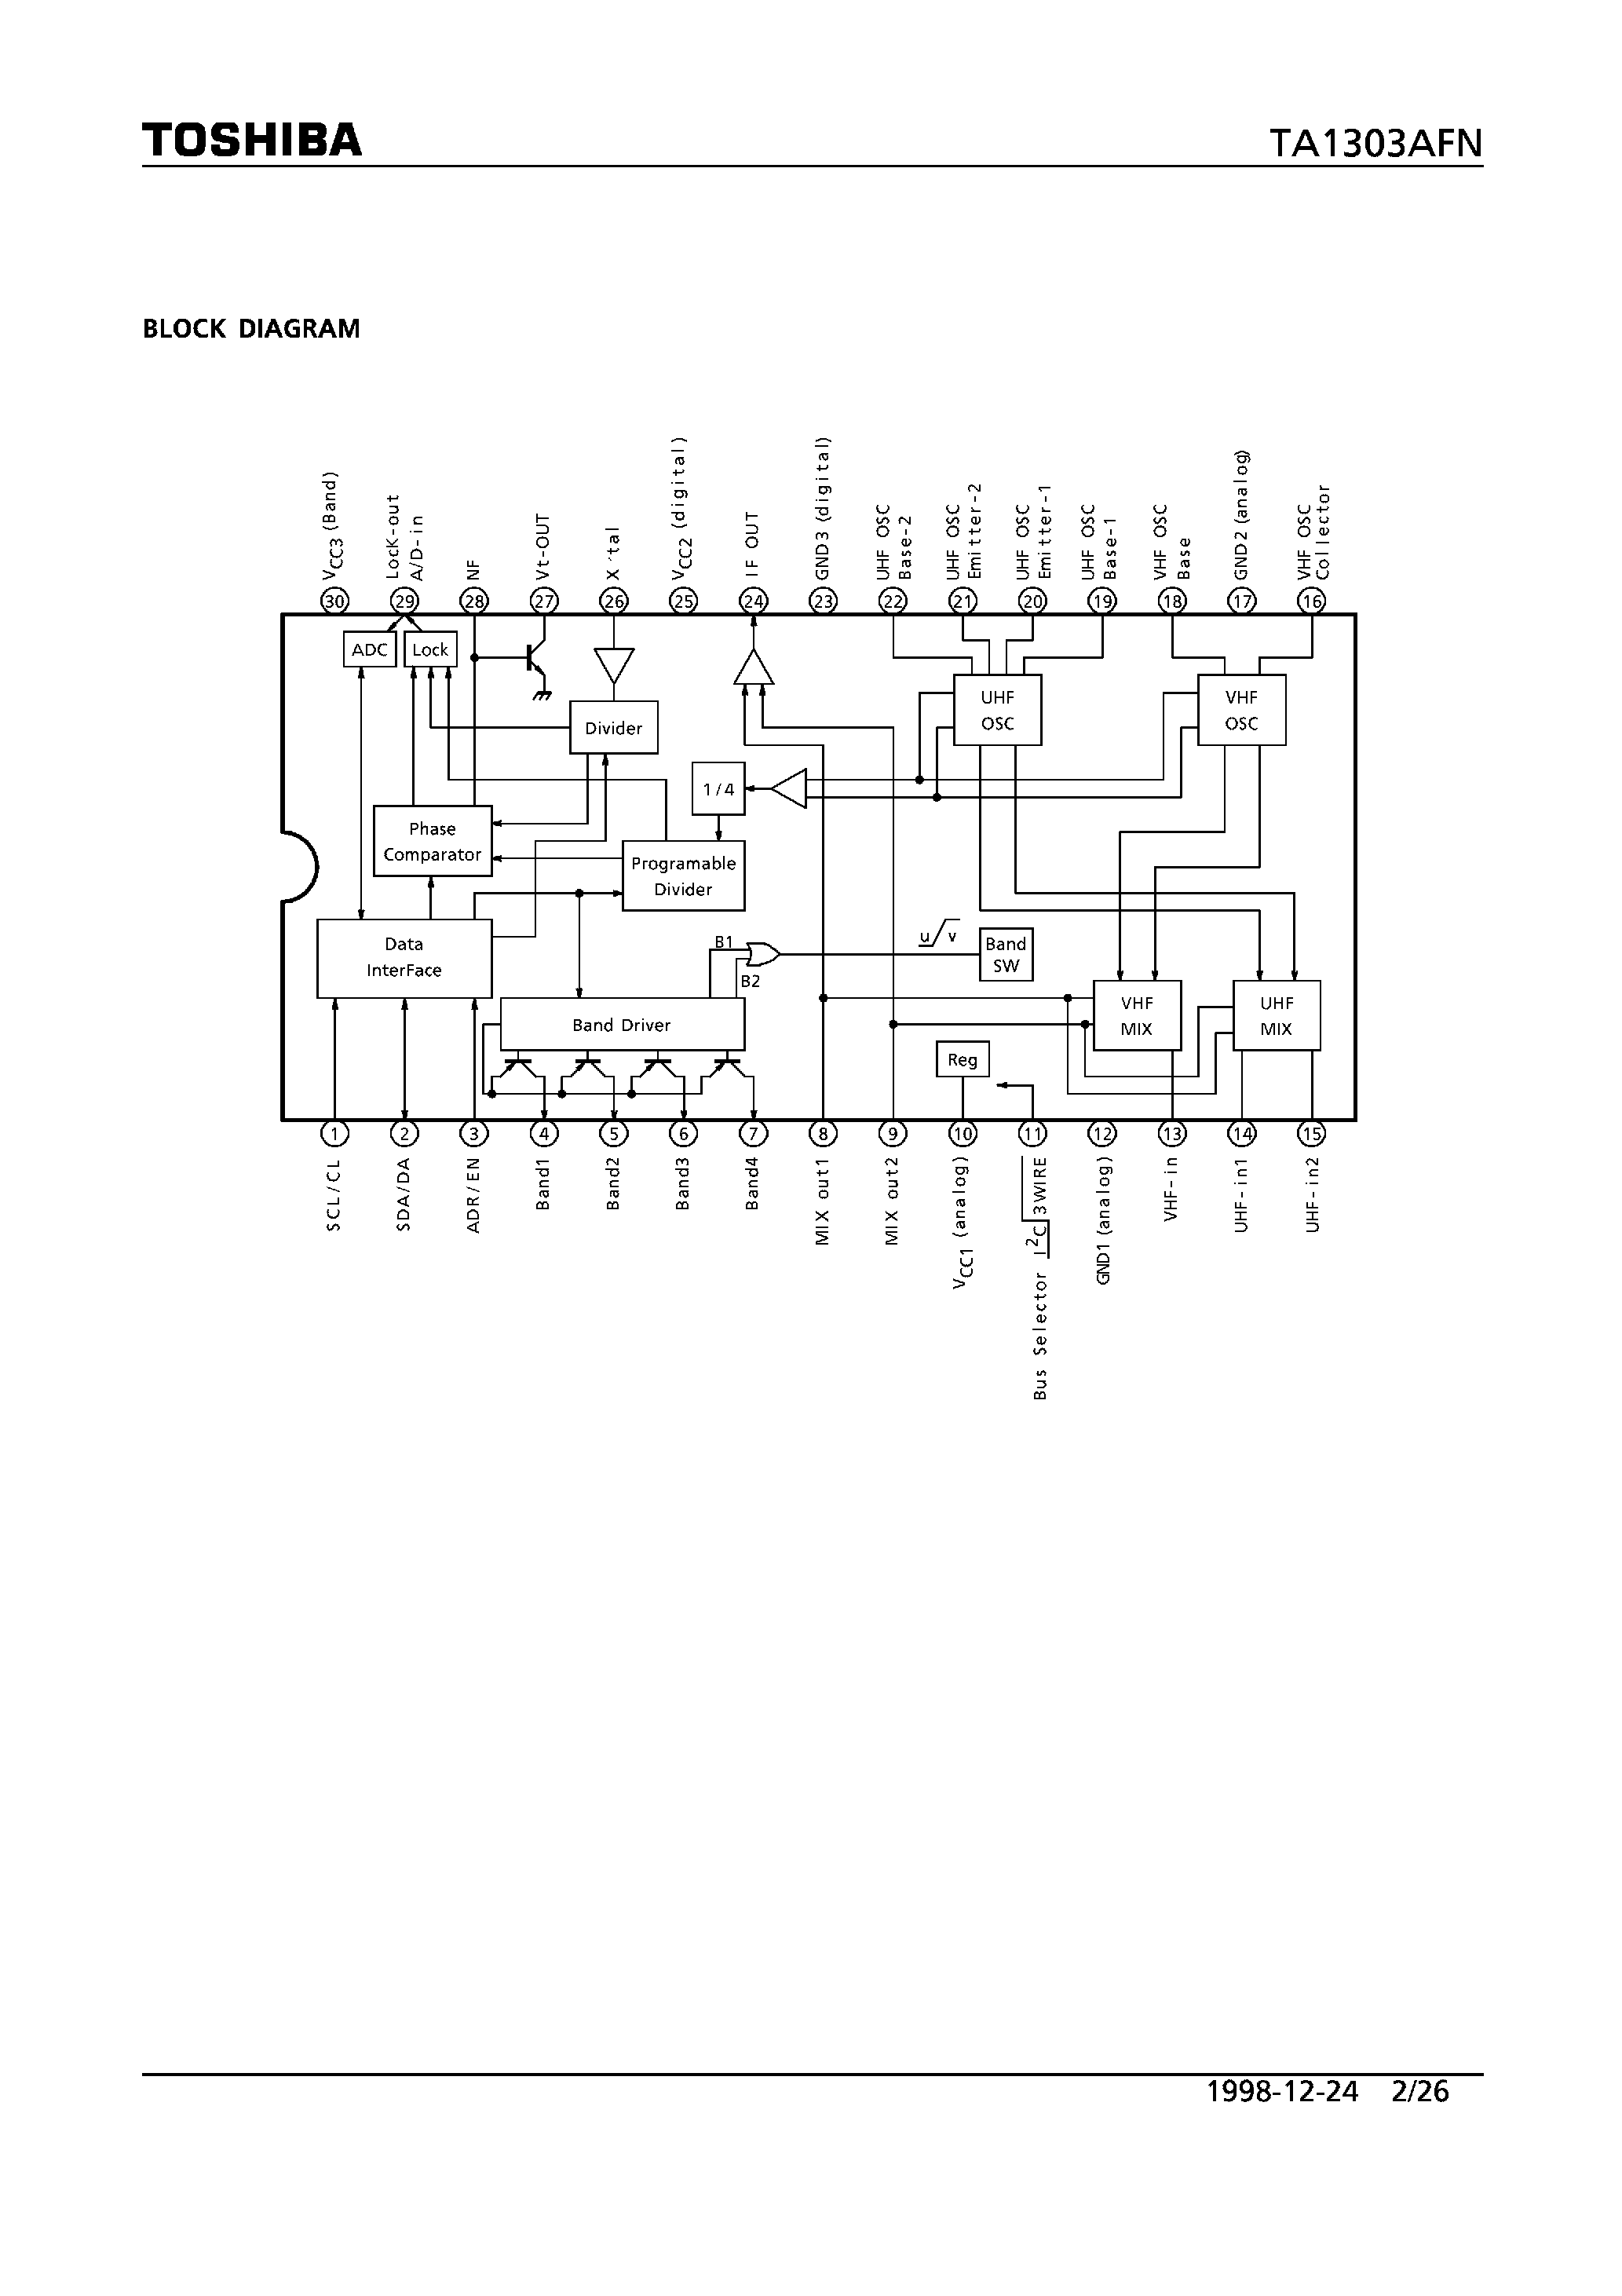 Datasheet TA1303AFN - MIXER/OSCILLATOR BUILT-IN FREQUENCY SYNTHSIZER page 2